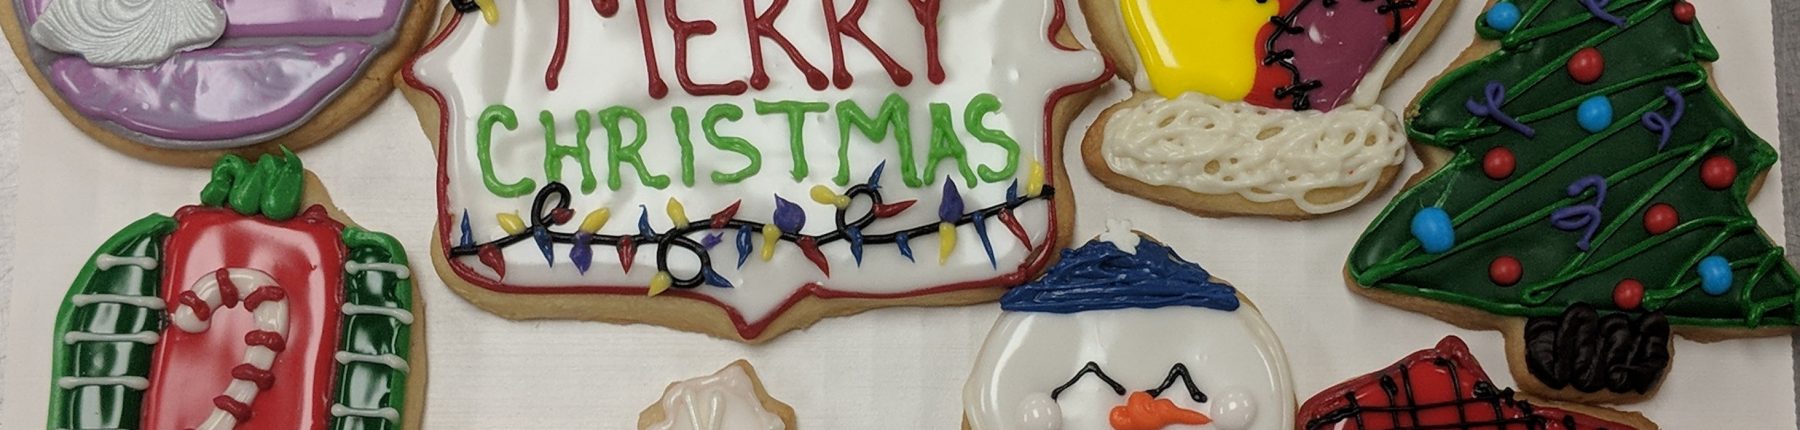 Festive Sugar Cookies beautifully decorated with icing reading Merry Christmas